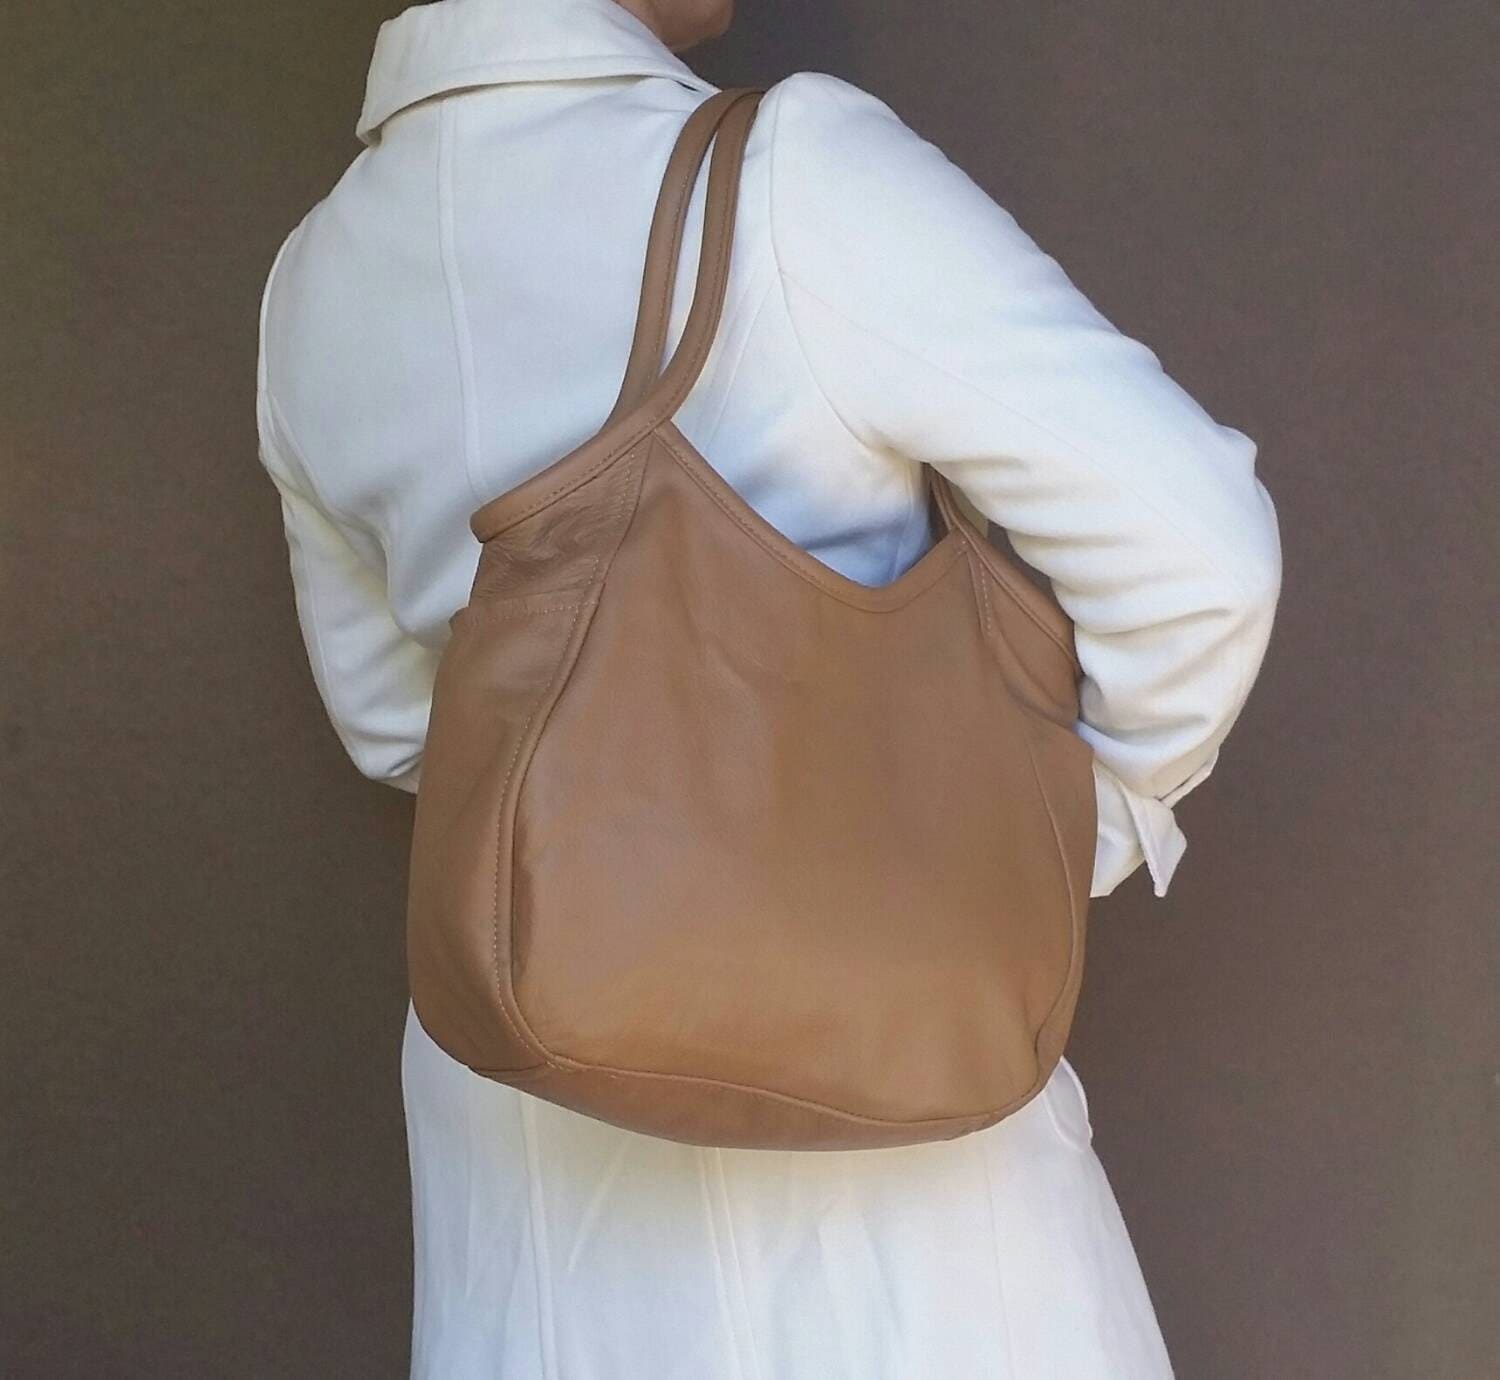 Camel leather tote bag everyday purse for her by Fgalaze on Etsy